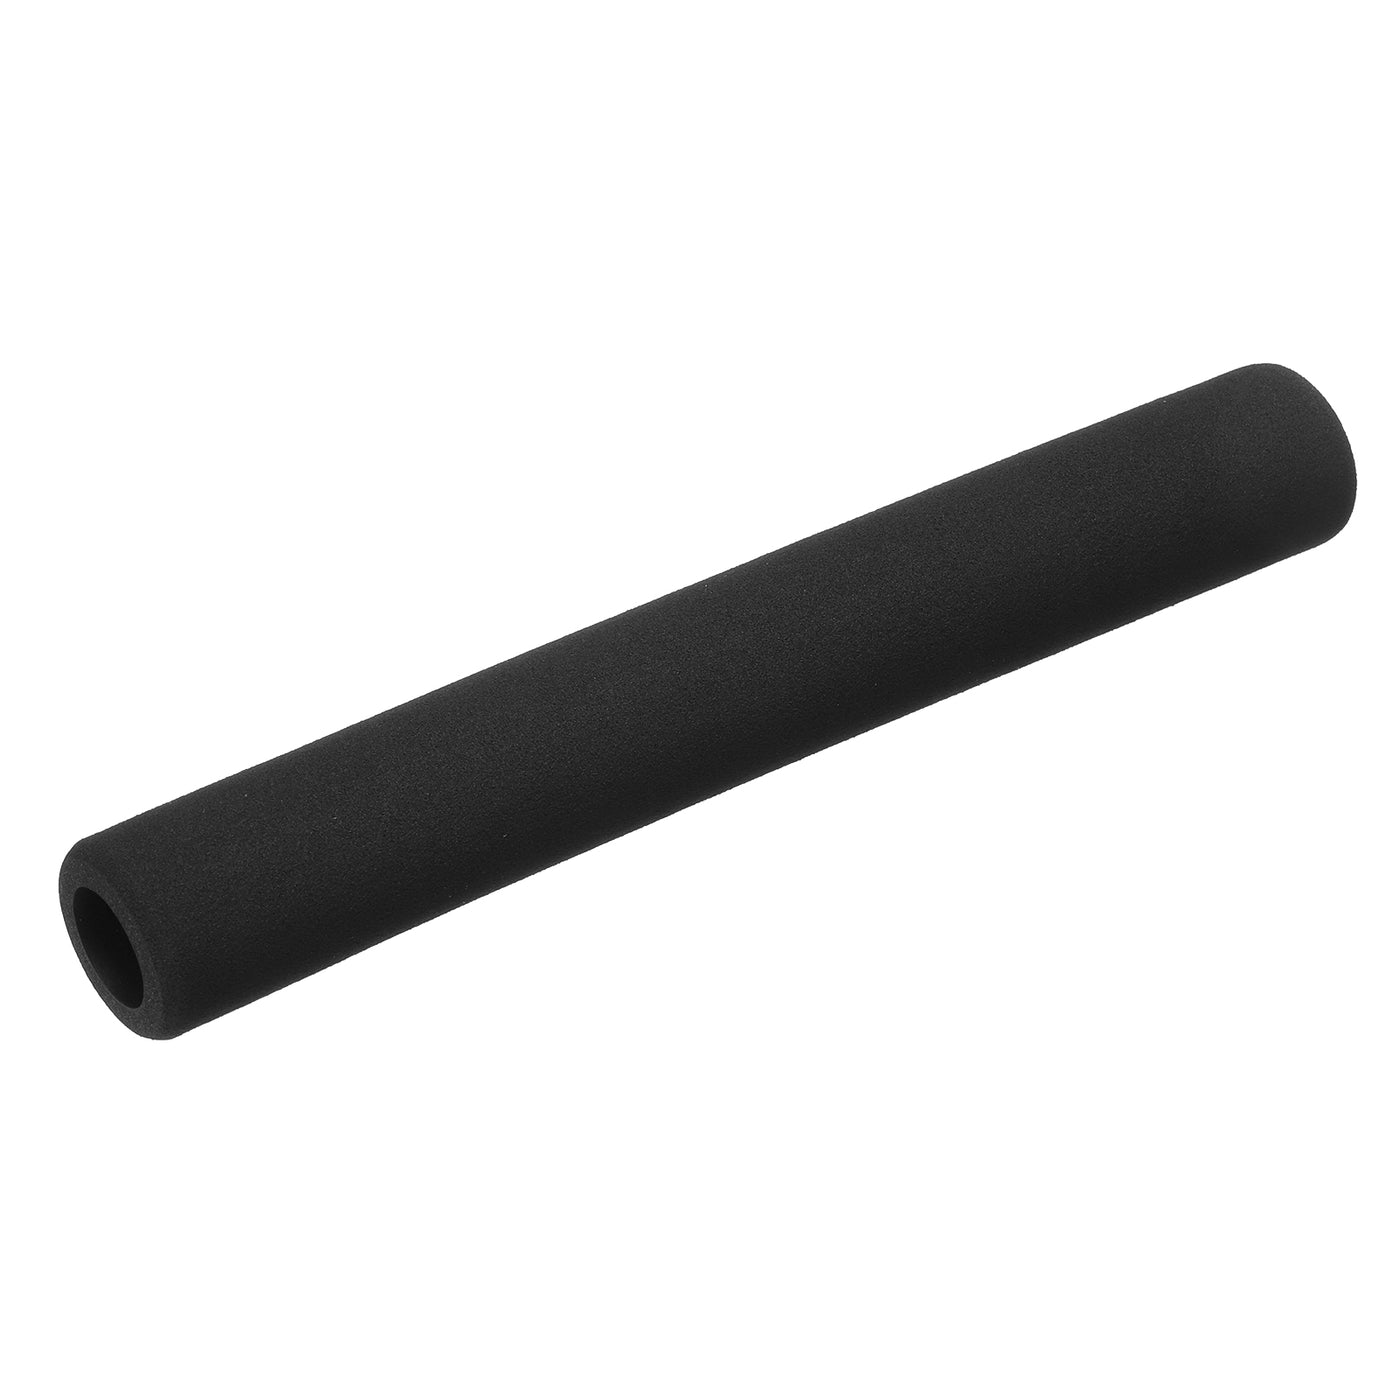 uxcell Uxcell Pipe Insulation Tube Foam Tubing for Handle Grip Support 18mm ID 28mm OD 200mm Heat Preservation Black